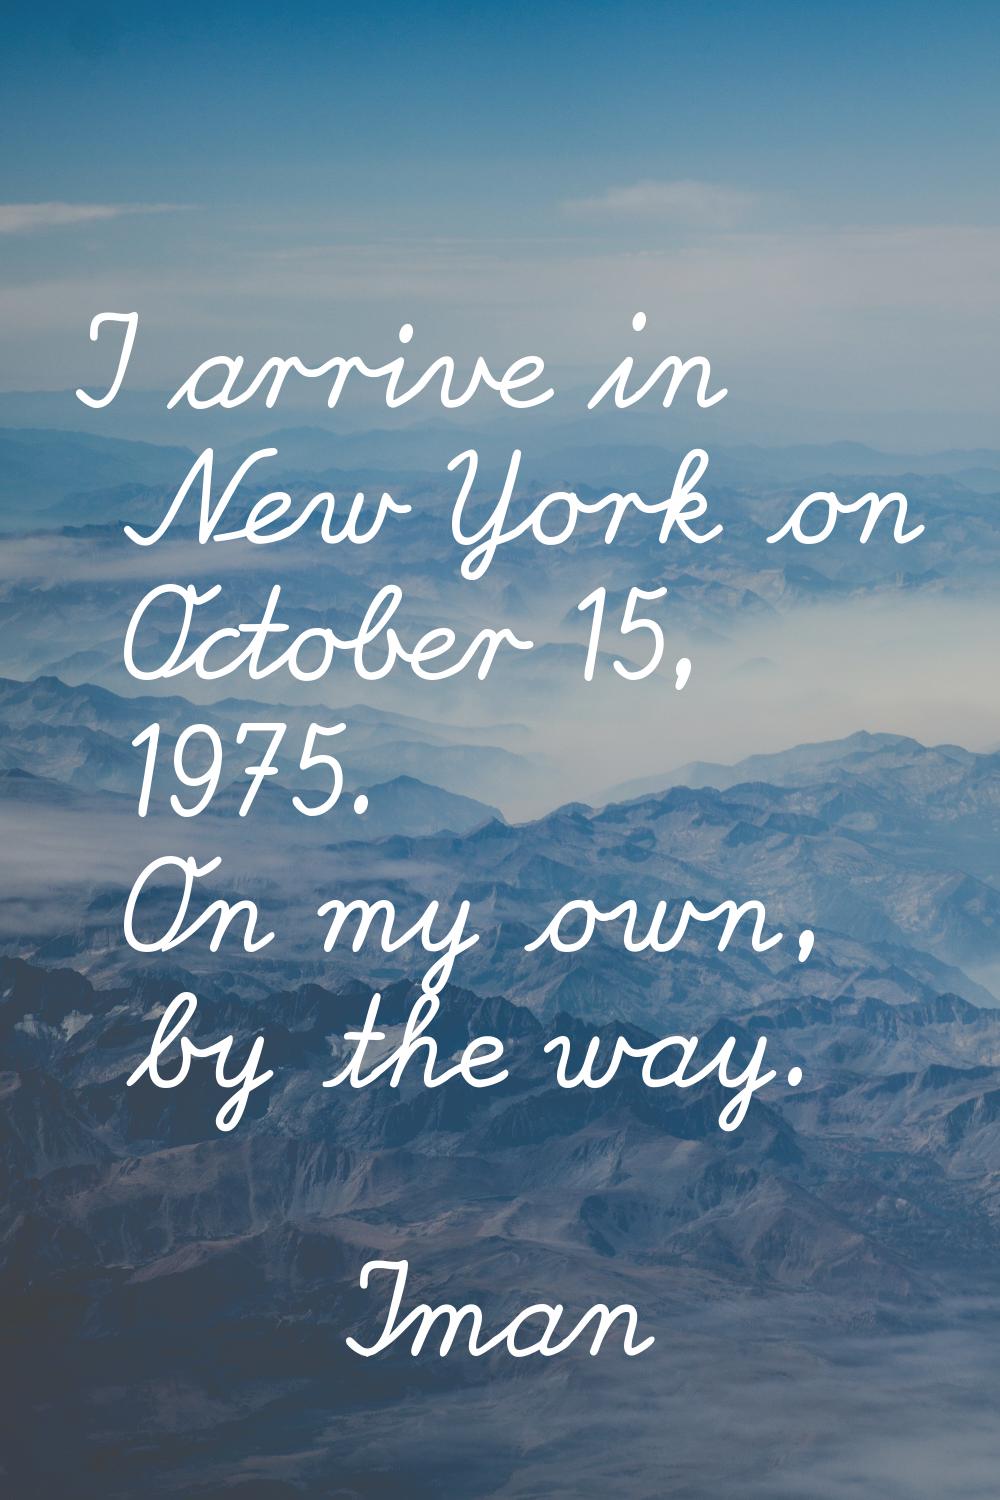 I arrive in New York on October 15, 1975. On my own, by the way.